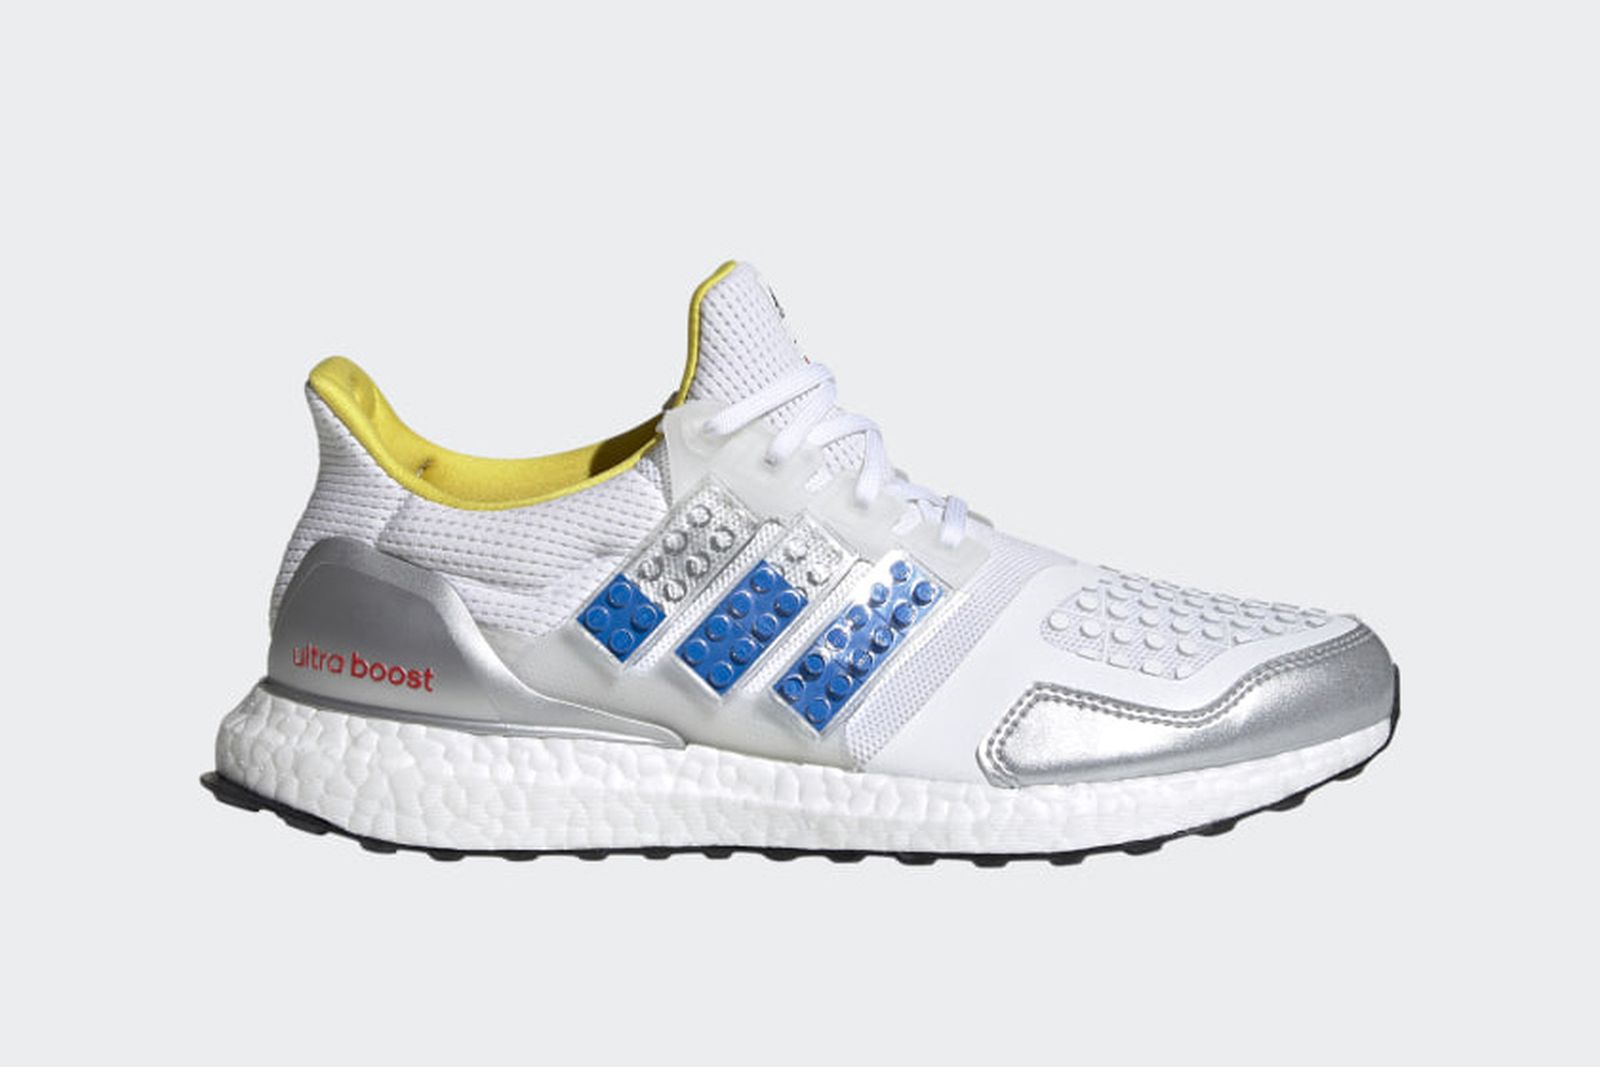 lego-adidas-ultraboost-dna-release-date-price-03